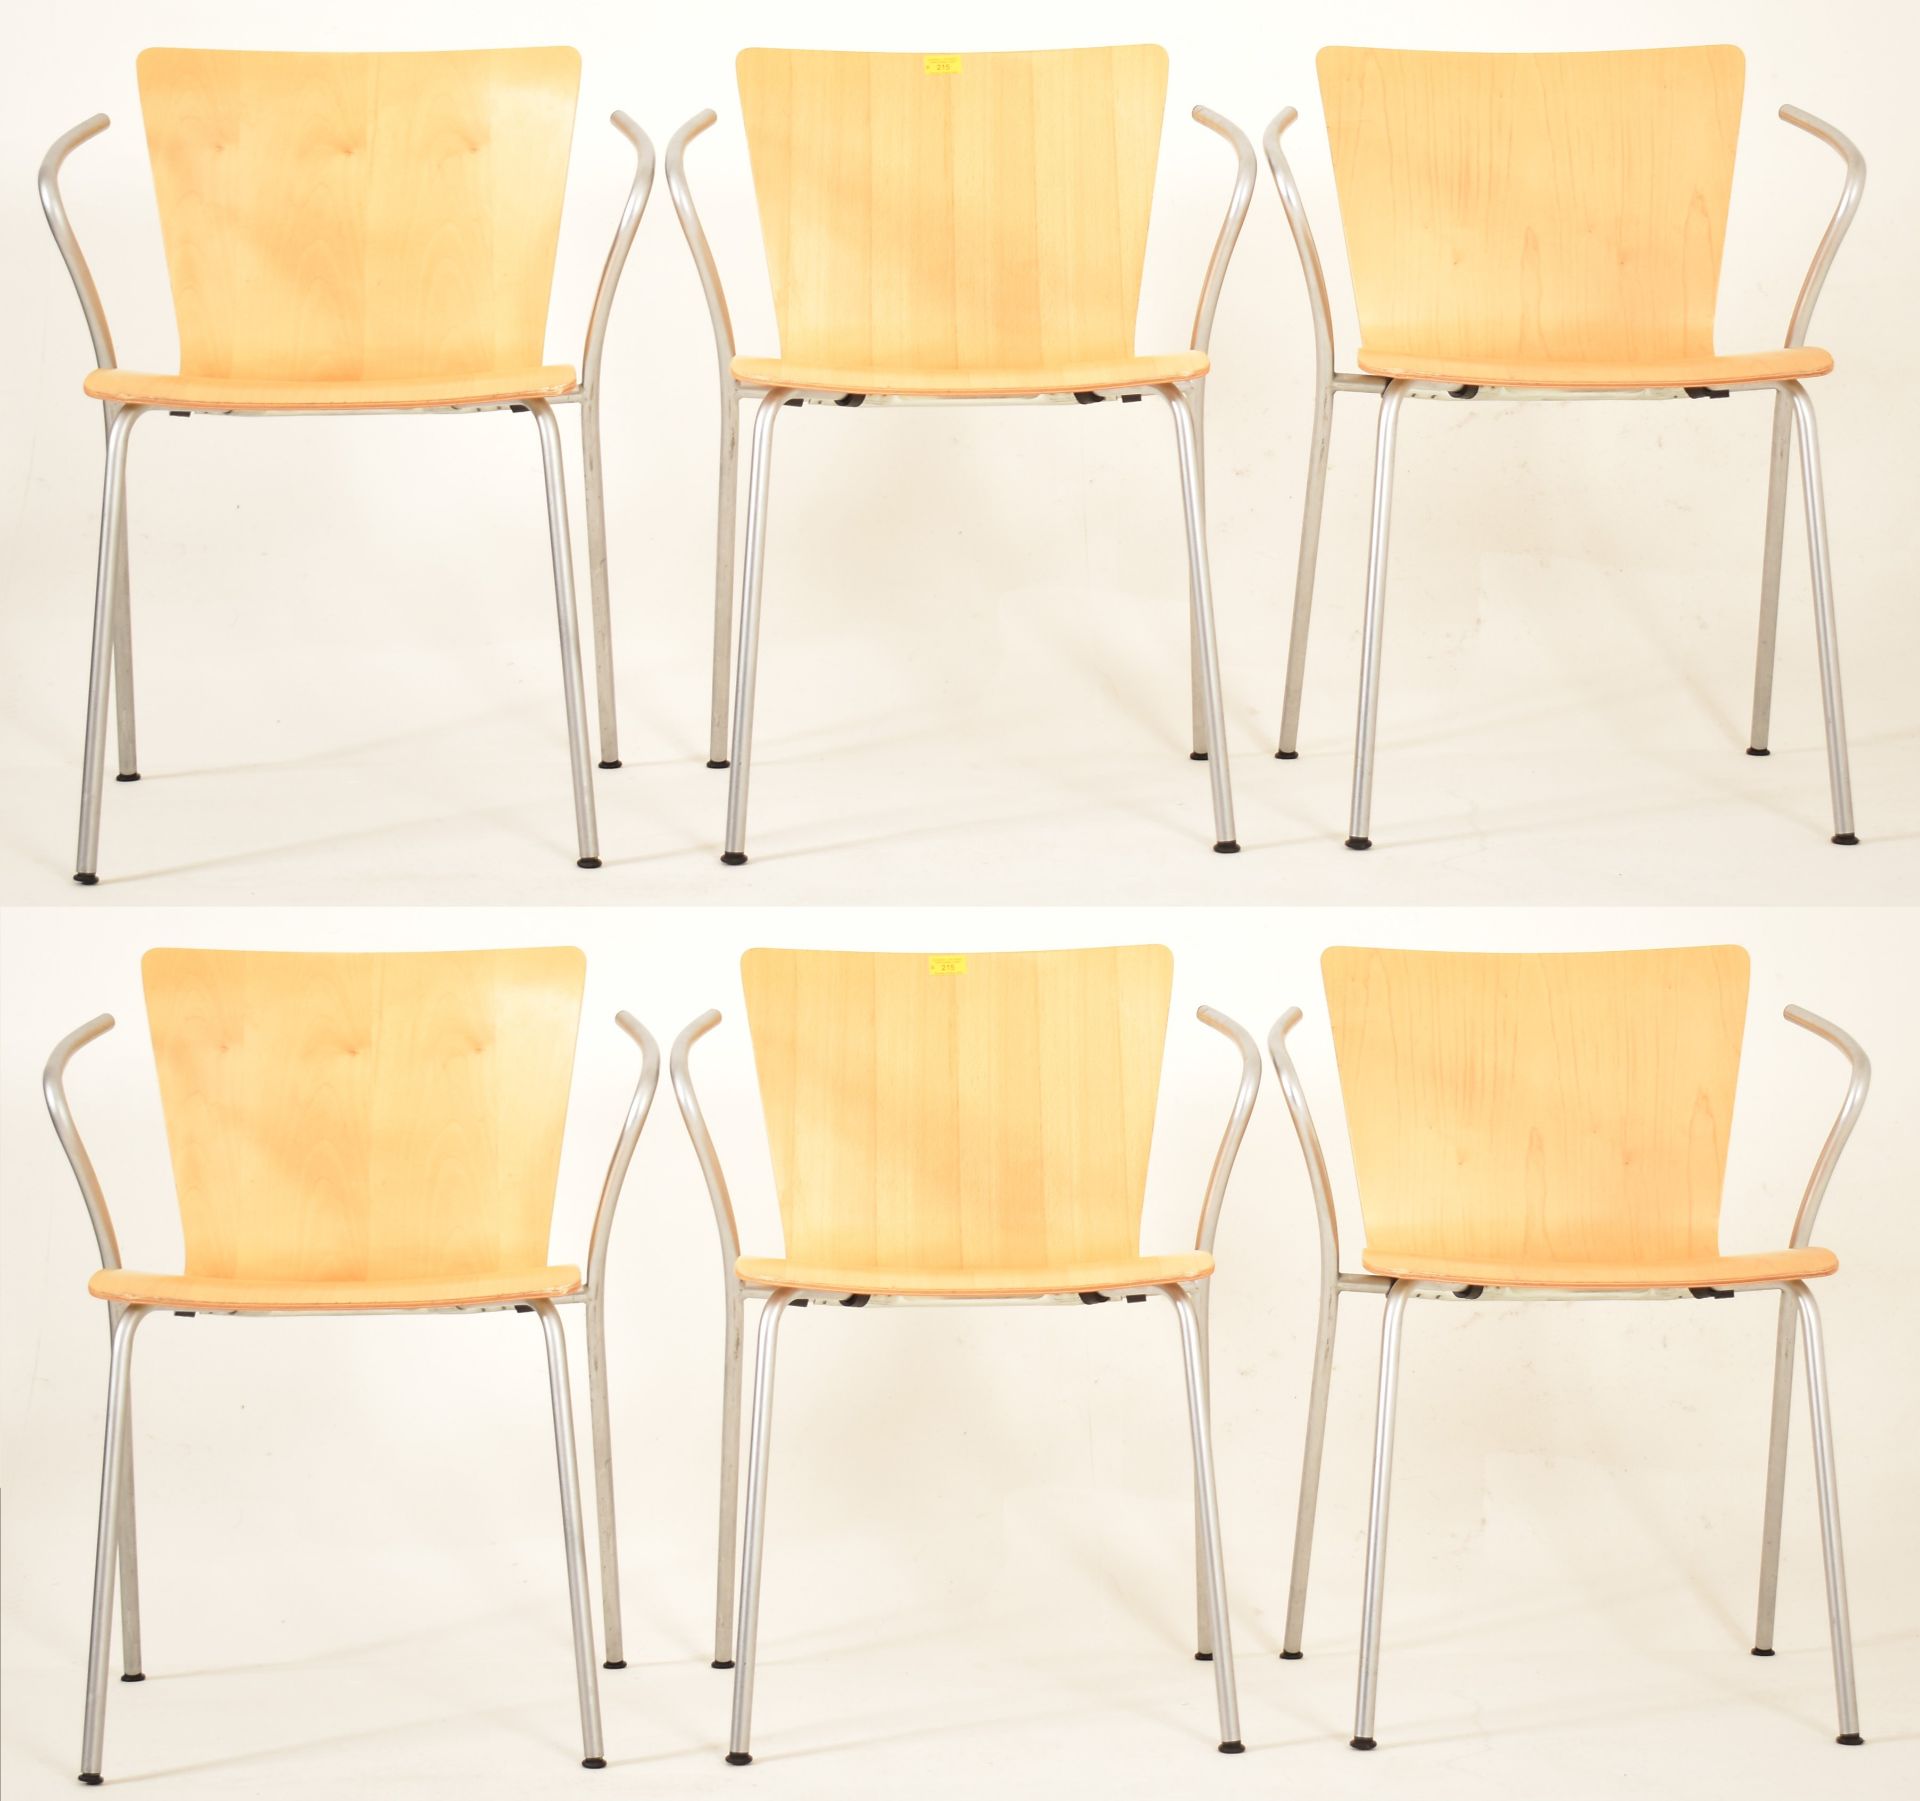 VICO MAGISTRETTI FOR FRITZ HANSEN - VICO DUO - SIX DINING CHAIRS